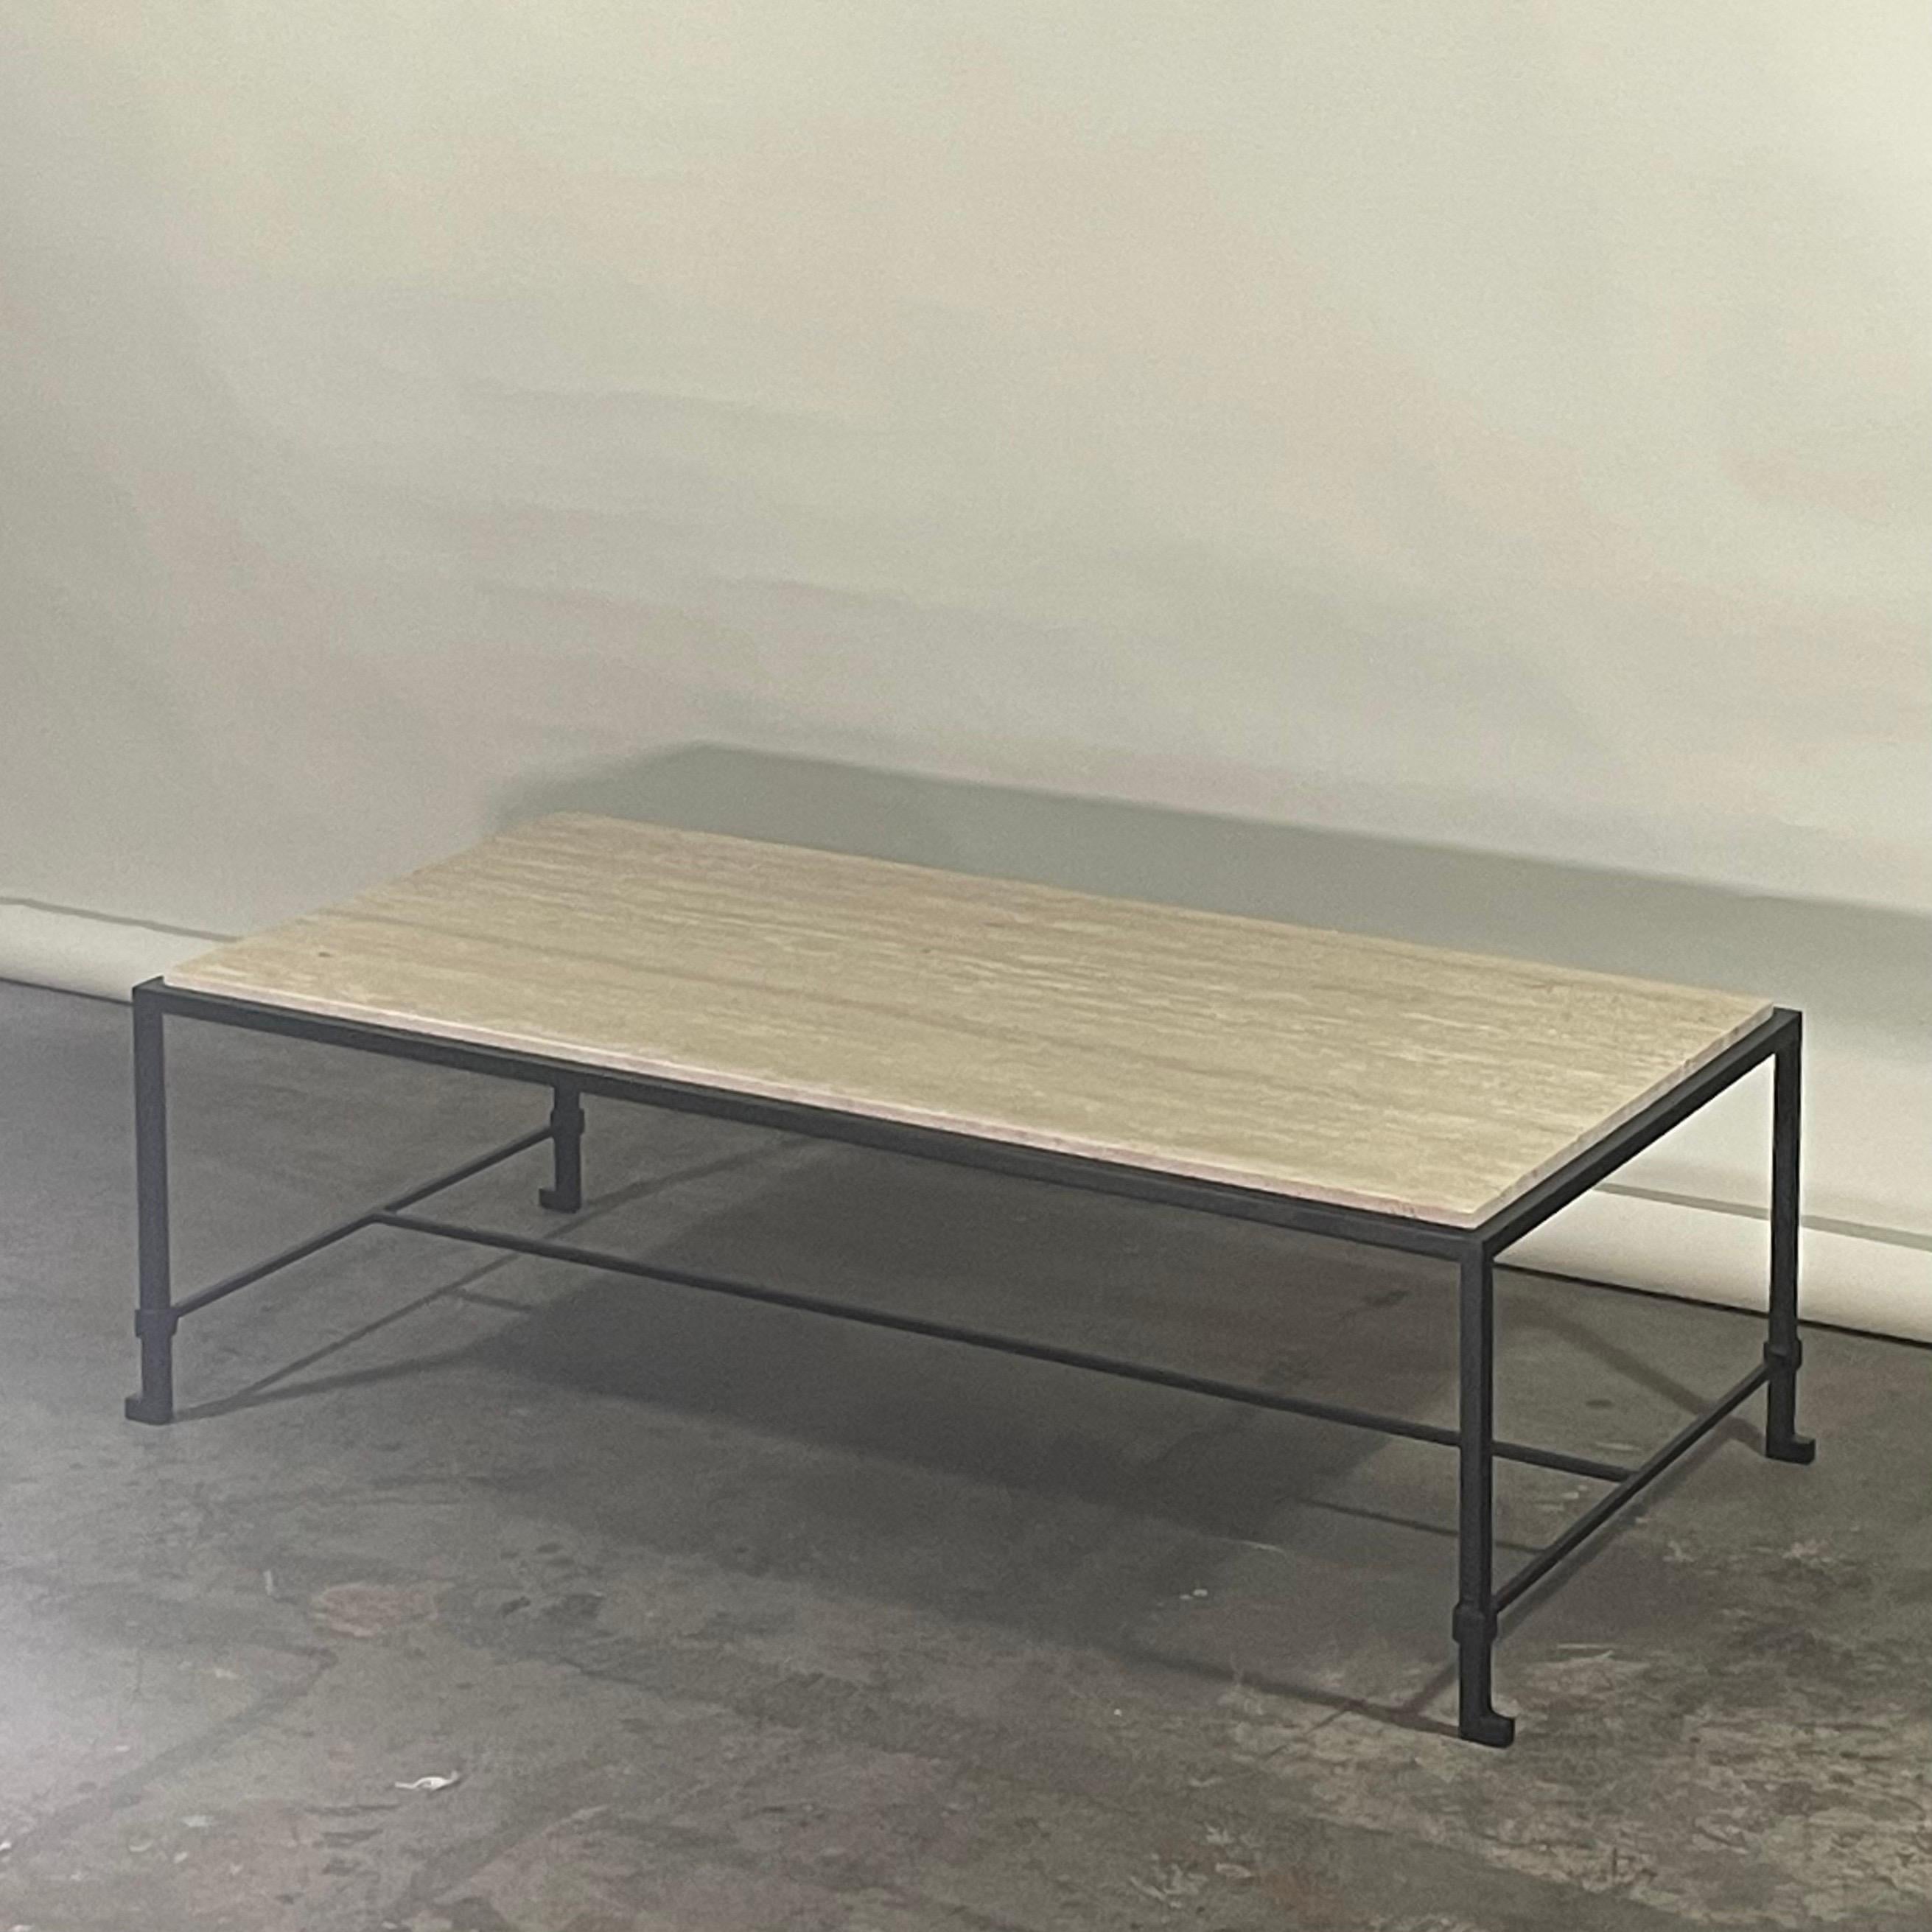 Narrow 'Diagramme' blackened steel and travertine coffee table by Design Frères.

Blackened steel base fitted with an Italian cream travertine top. Inspired by the timeless aesthetic of French modern design, this console from our exclusive Design